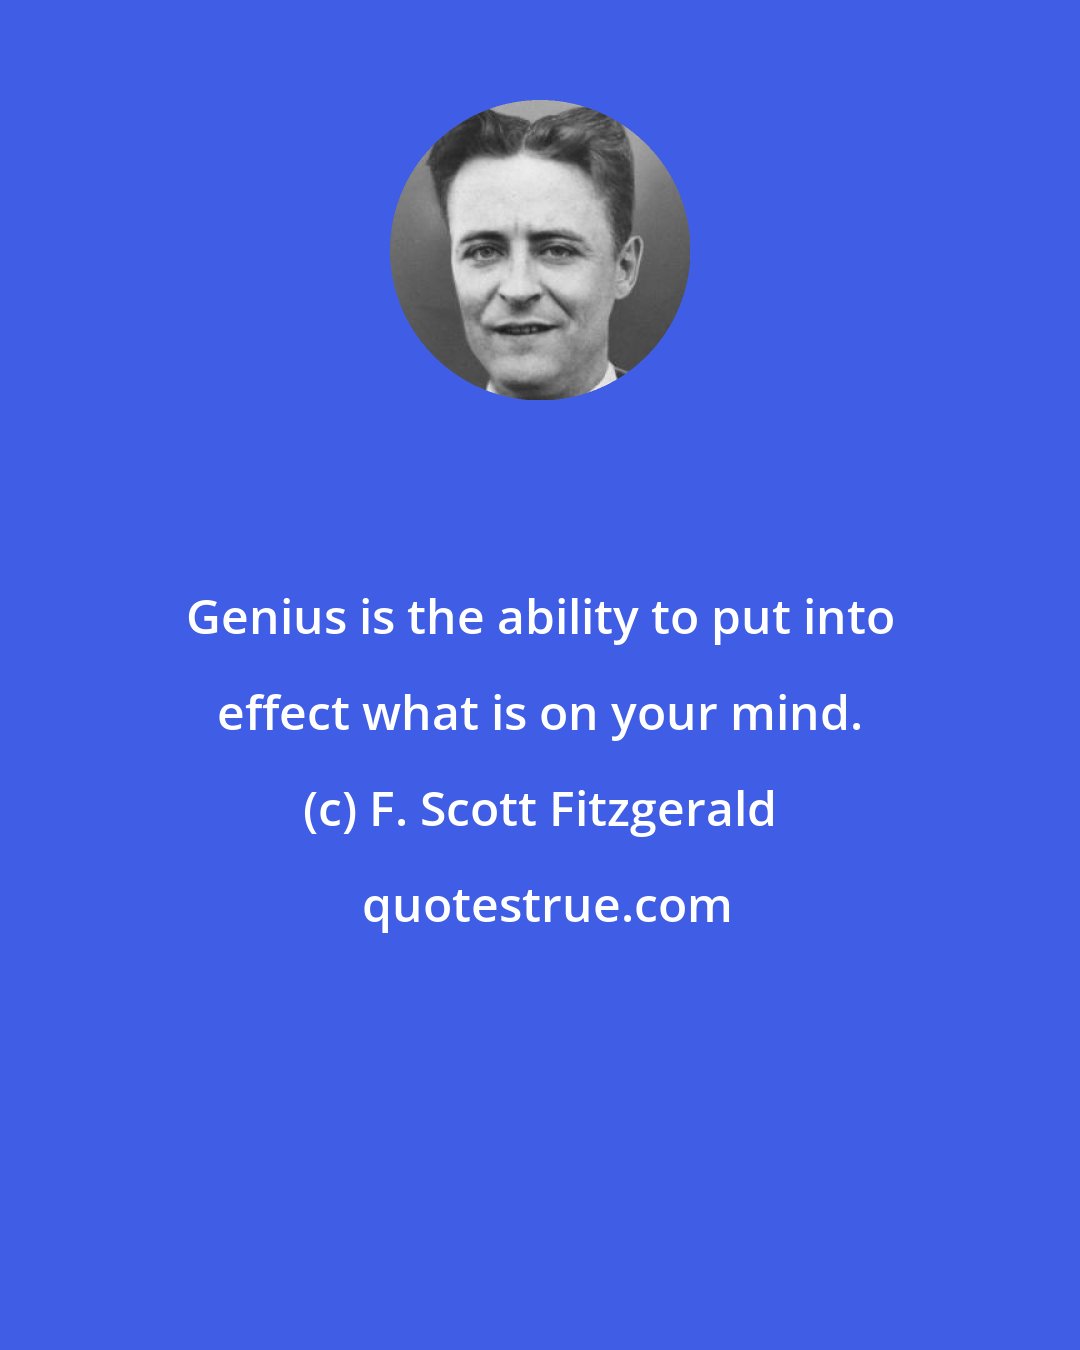 F. Scott Fitzgerald: Genius is the ability to put into effect what is on your mind.